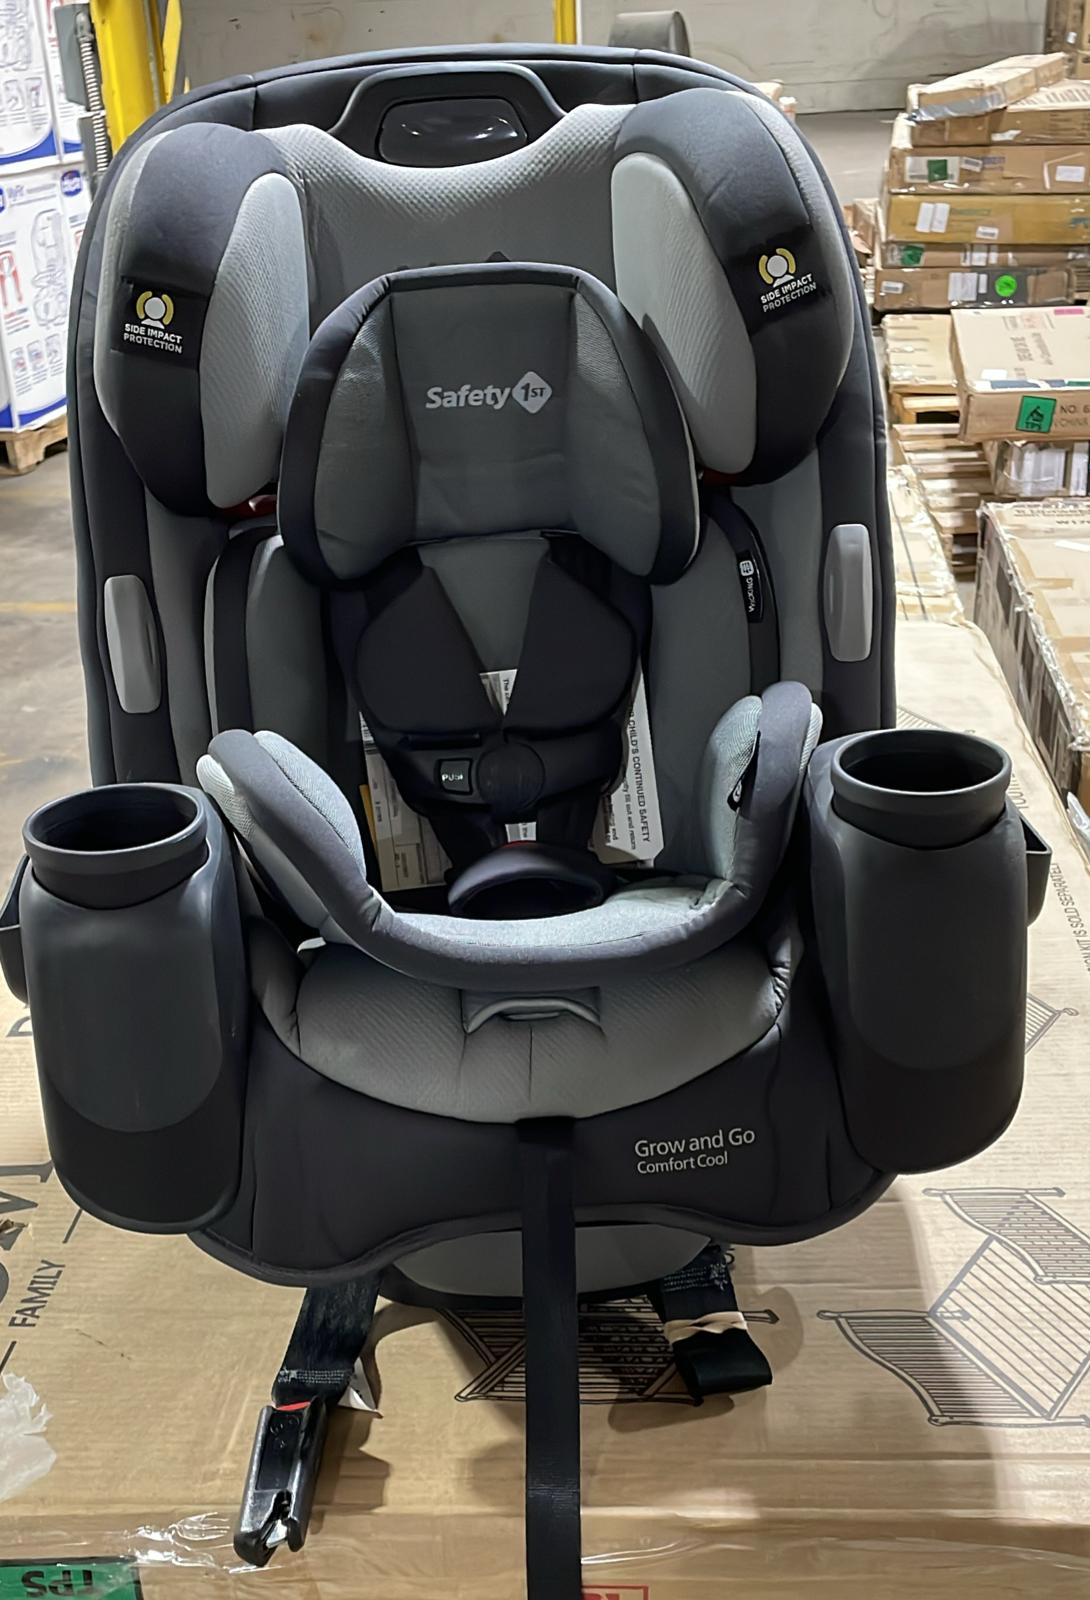 New Safety 1st Grow and Go Comfort Cool All-in-One Convertible Car Seat (Pebble Path)